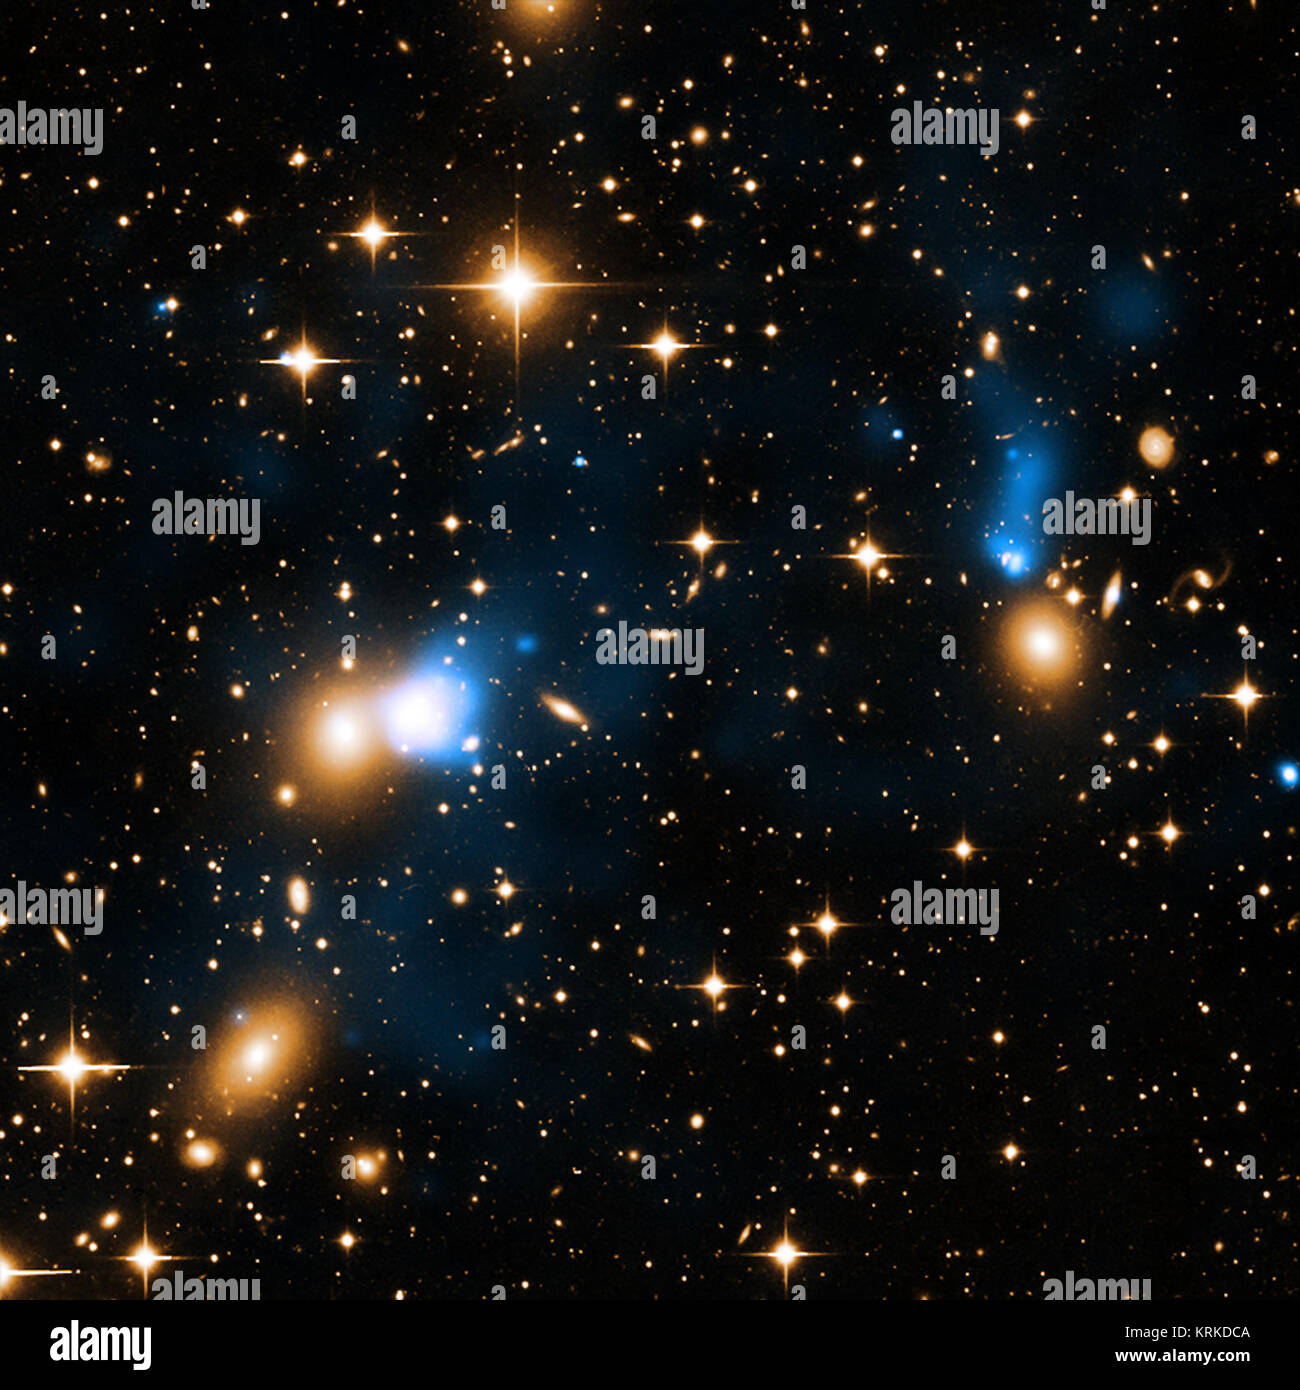 An extraordinary ribbon of hot gas trailing behind a galaxy like a tail has been discovered using data from NASA's Chandra X-ray Observatory. This ribbon, or X-ray tail, is likely due to gas stripped from the galaxy as it moves through a vast cloud of hot intergalactic gas. With a length of at least 250,000 light years, it is likely the largest such tail ever detected. The newly discovered tail is seen in this composite image of X-rays (blue) and optical data (yellow). Zwicky 8338 Stock Photo